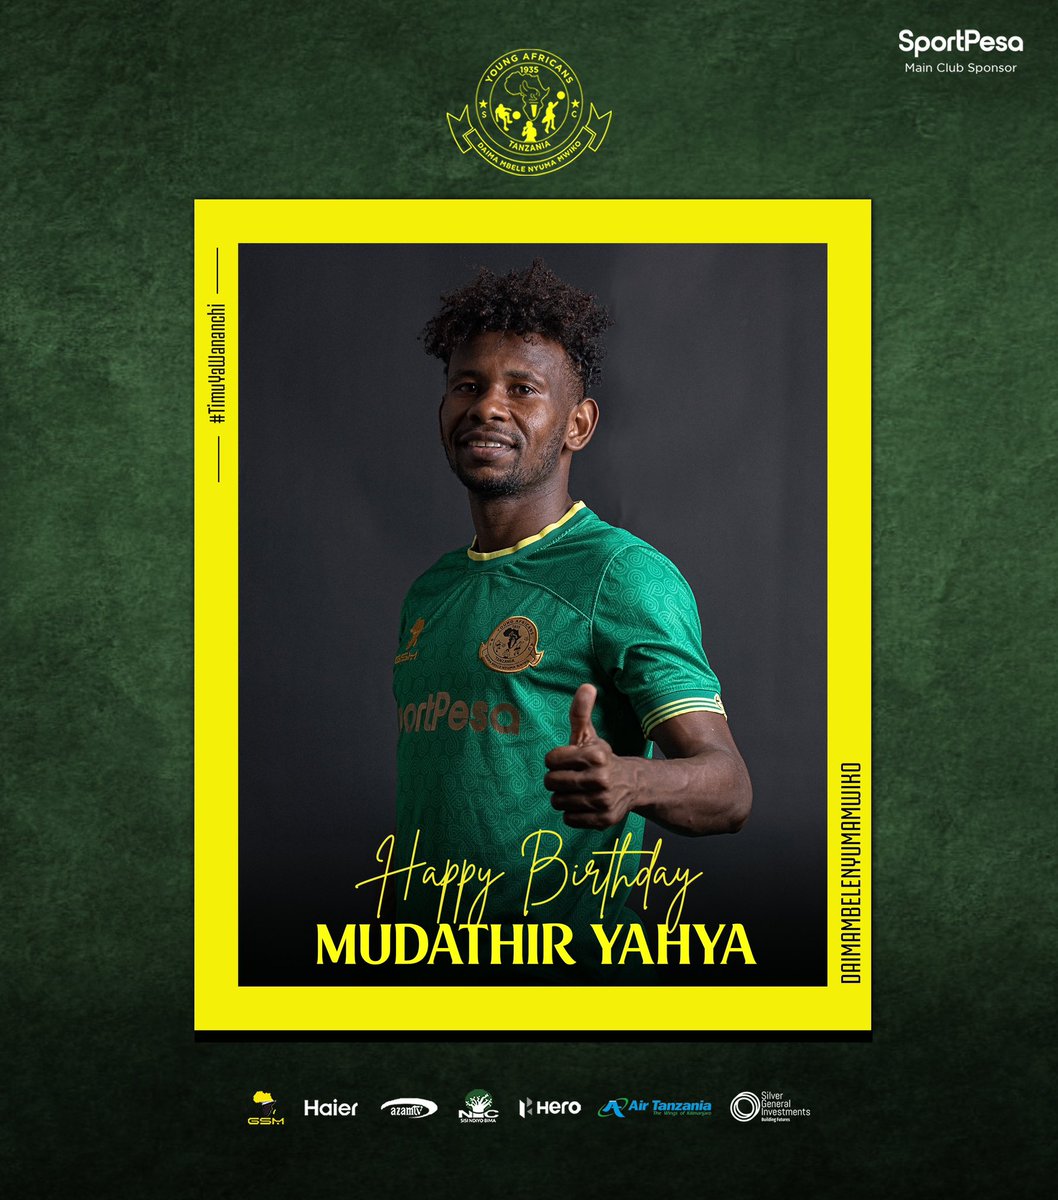 Happy Birthday to Mudathir Yahya. 🎂🤙🏽

Leave your birthday wishes for Uncle Mudathir below 🔰👇

#TheClubAboveAll
#DaimaMbeleNyumaMwiko